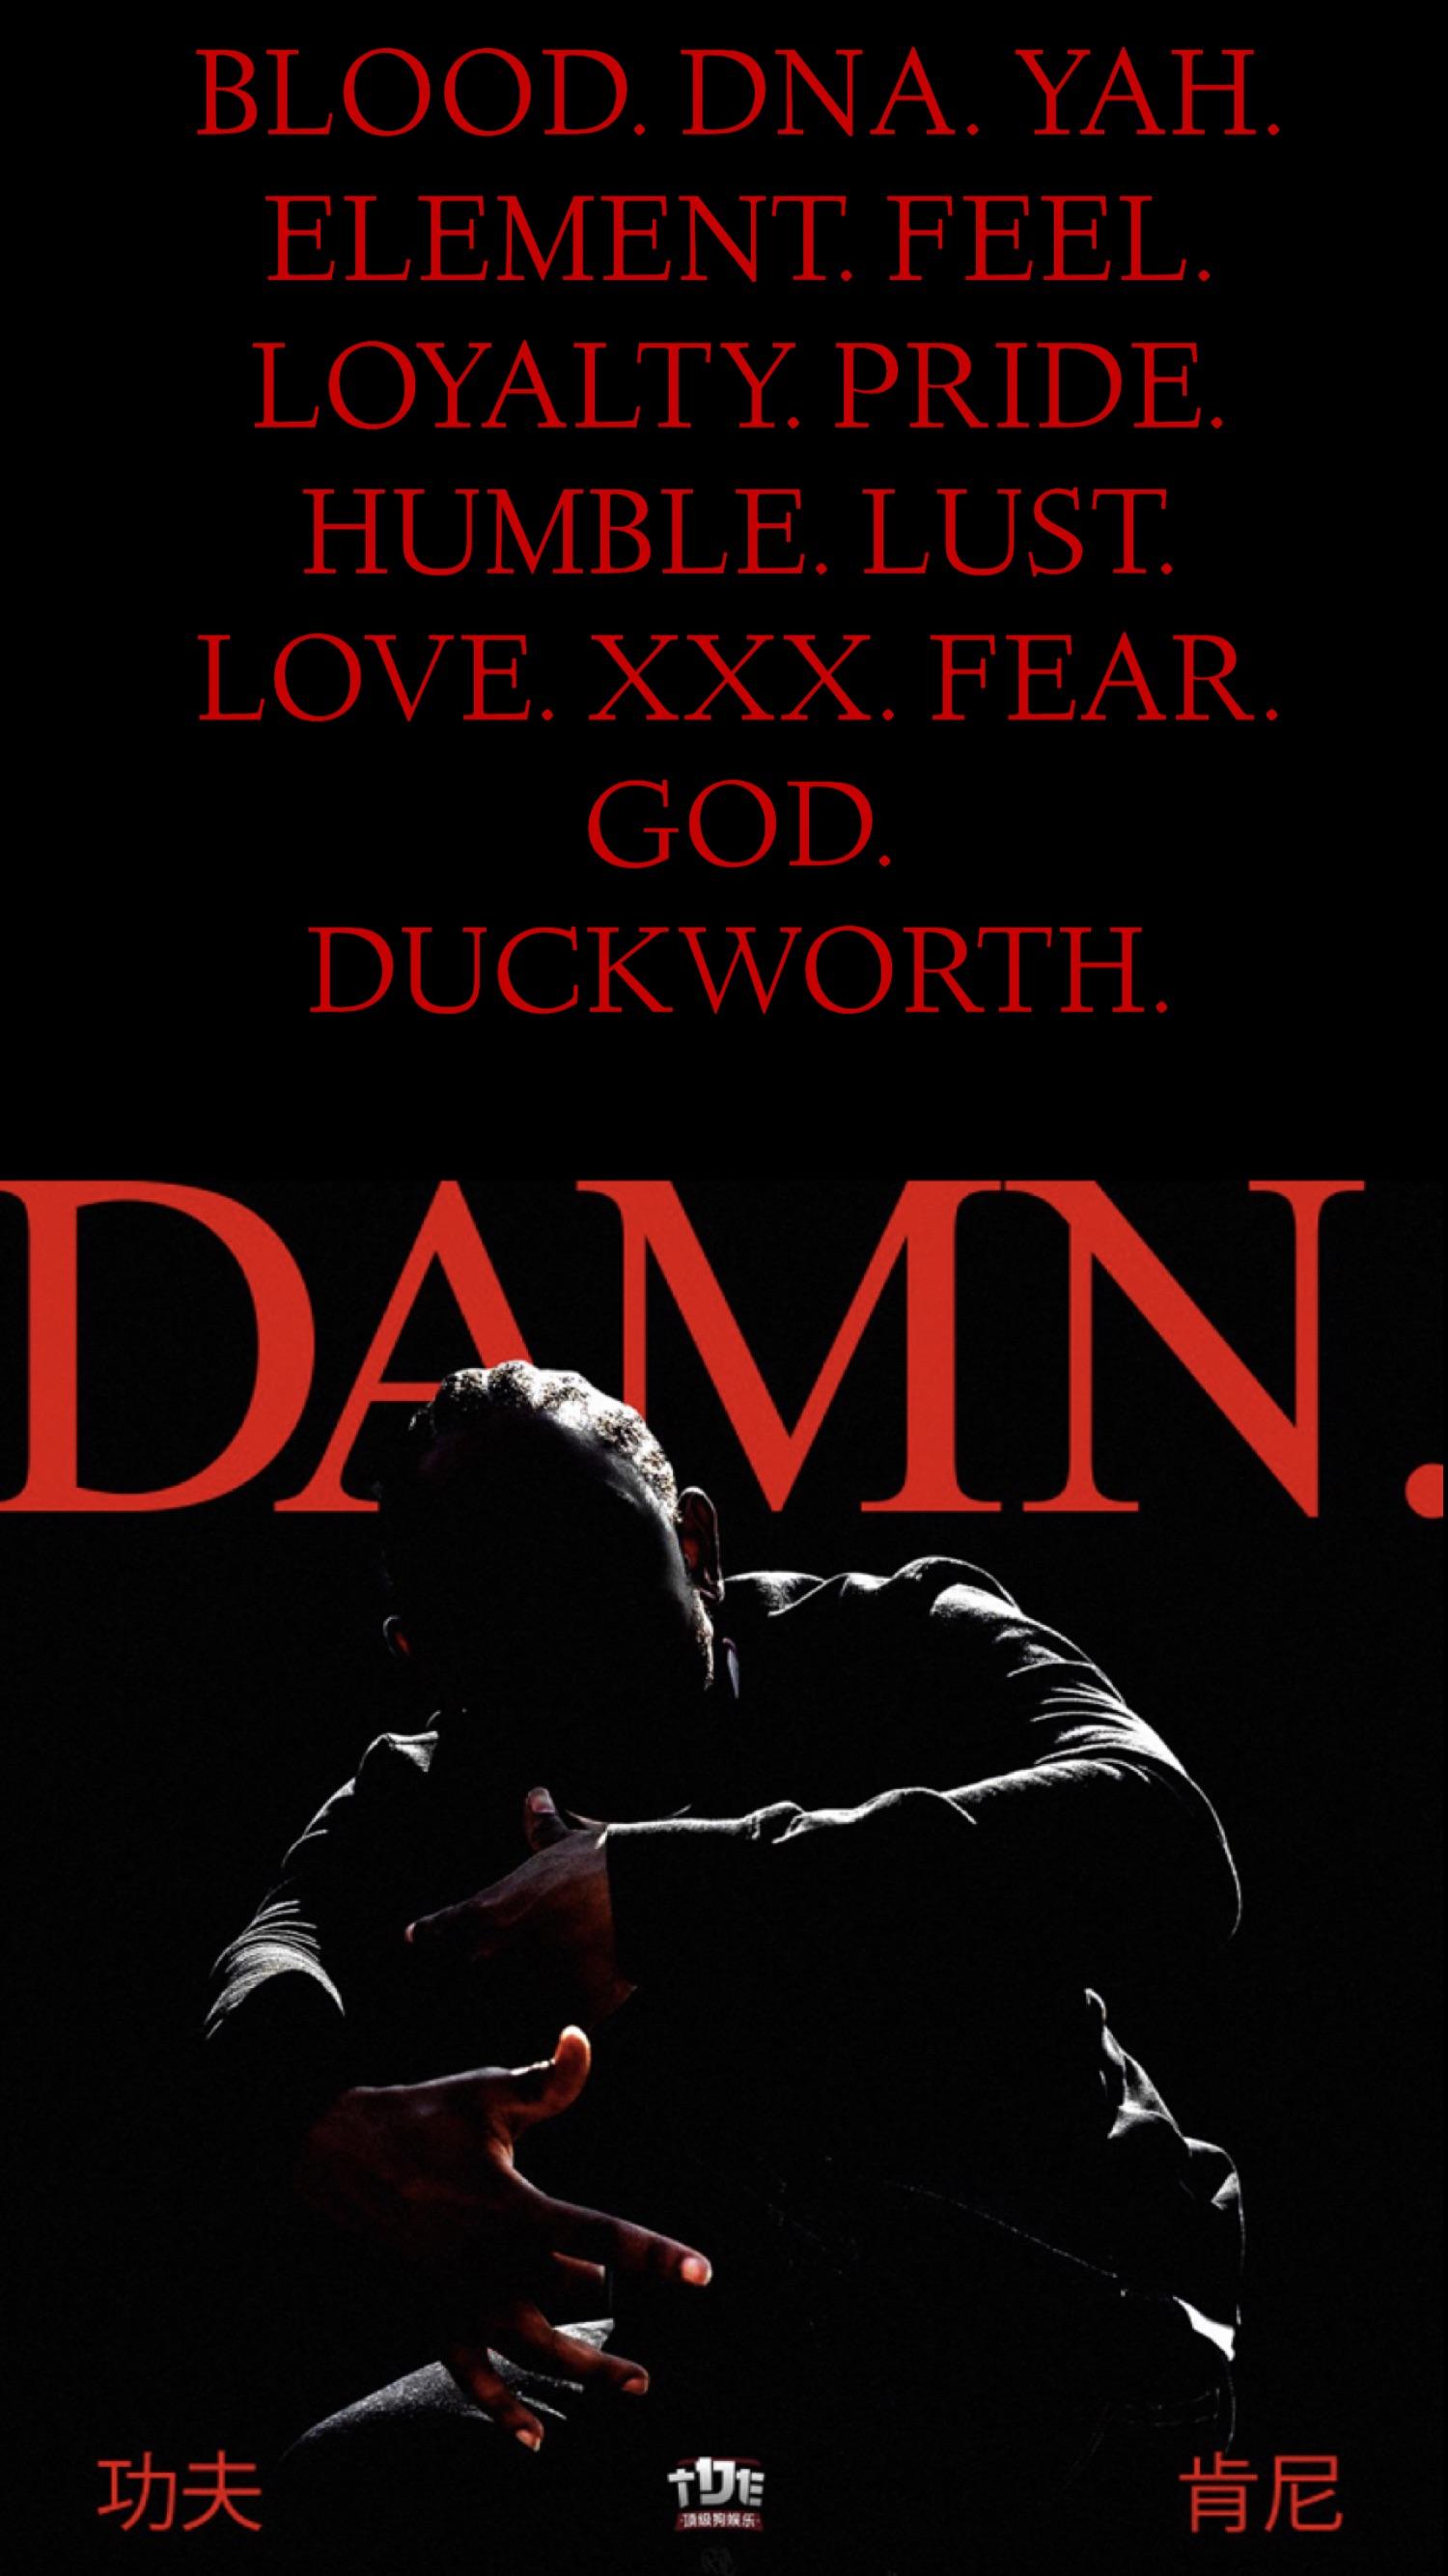 I Turned U ROBxC Awesome DAMN. Cover Into A IPhone Wallpaper. All